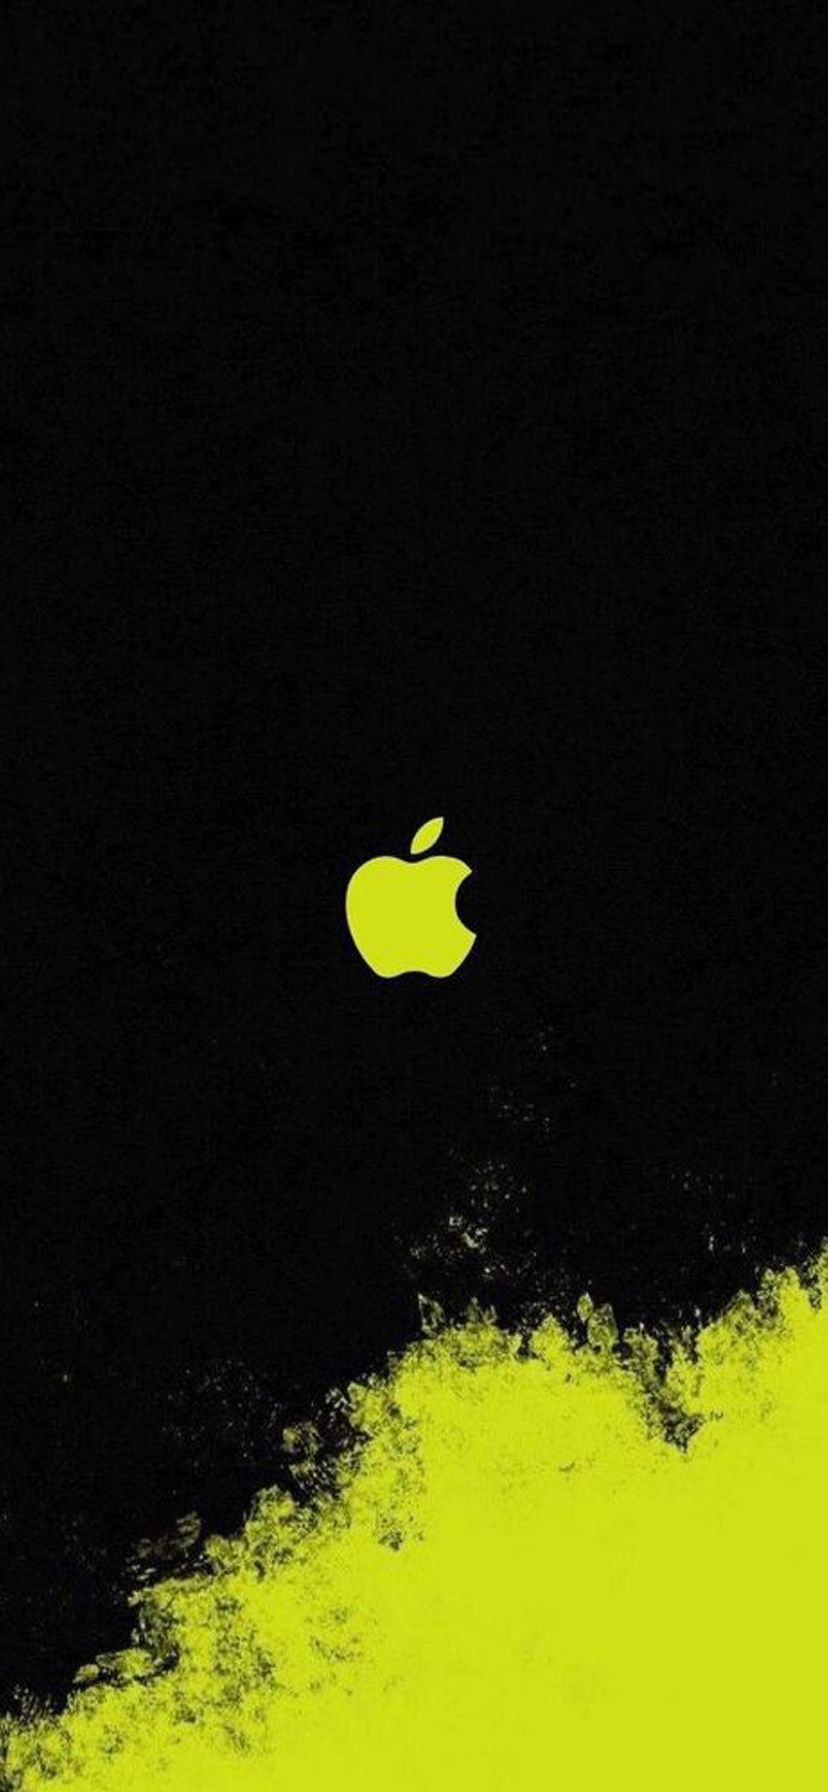 Alternative Wallpaper for Apple iPhone 11 and Yellow Art Apple Logo Wallpaper. Wallpaper Download. High Resolution Wallpaper